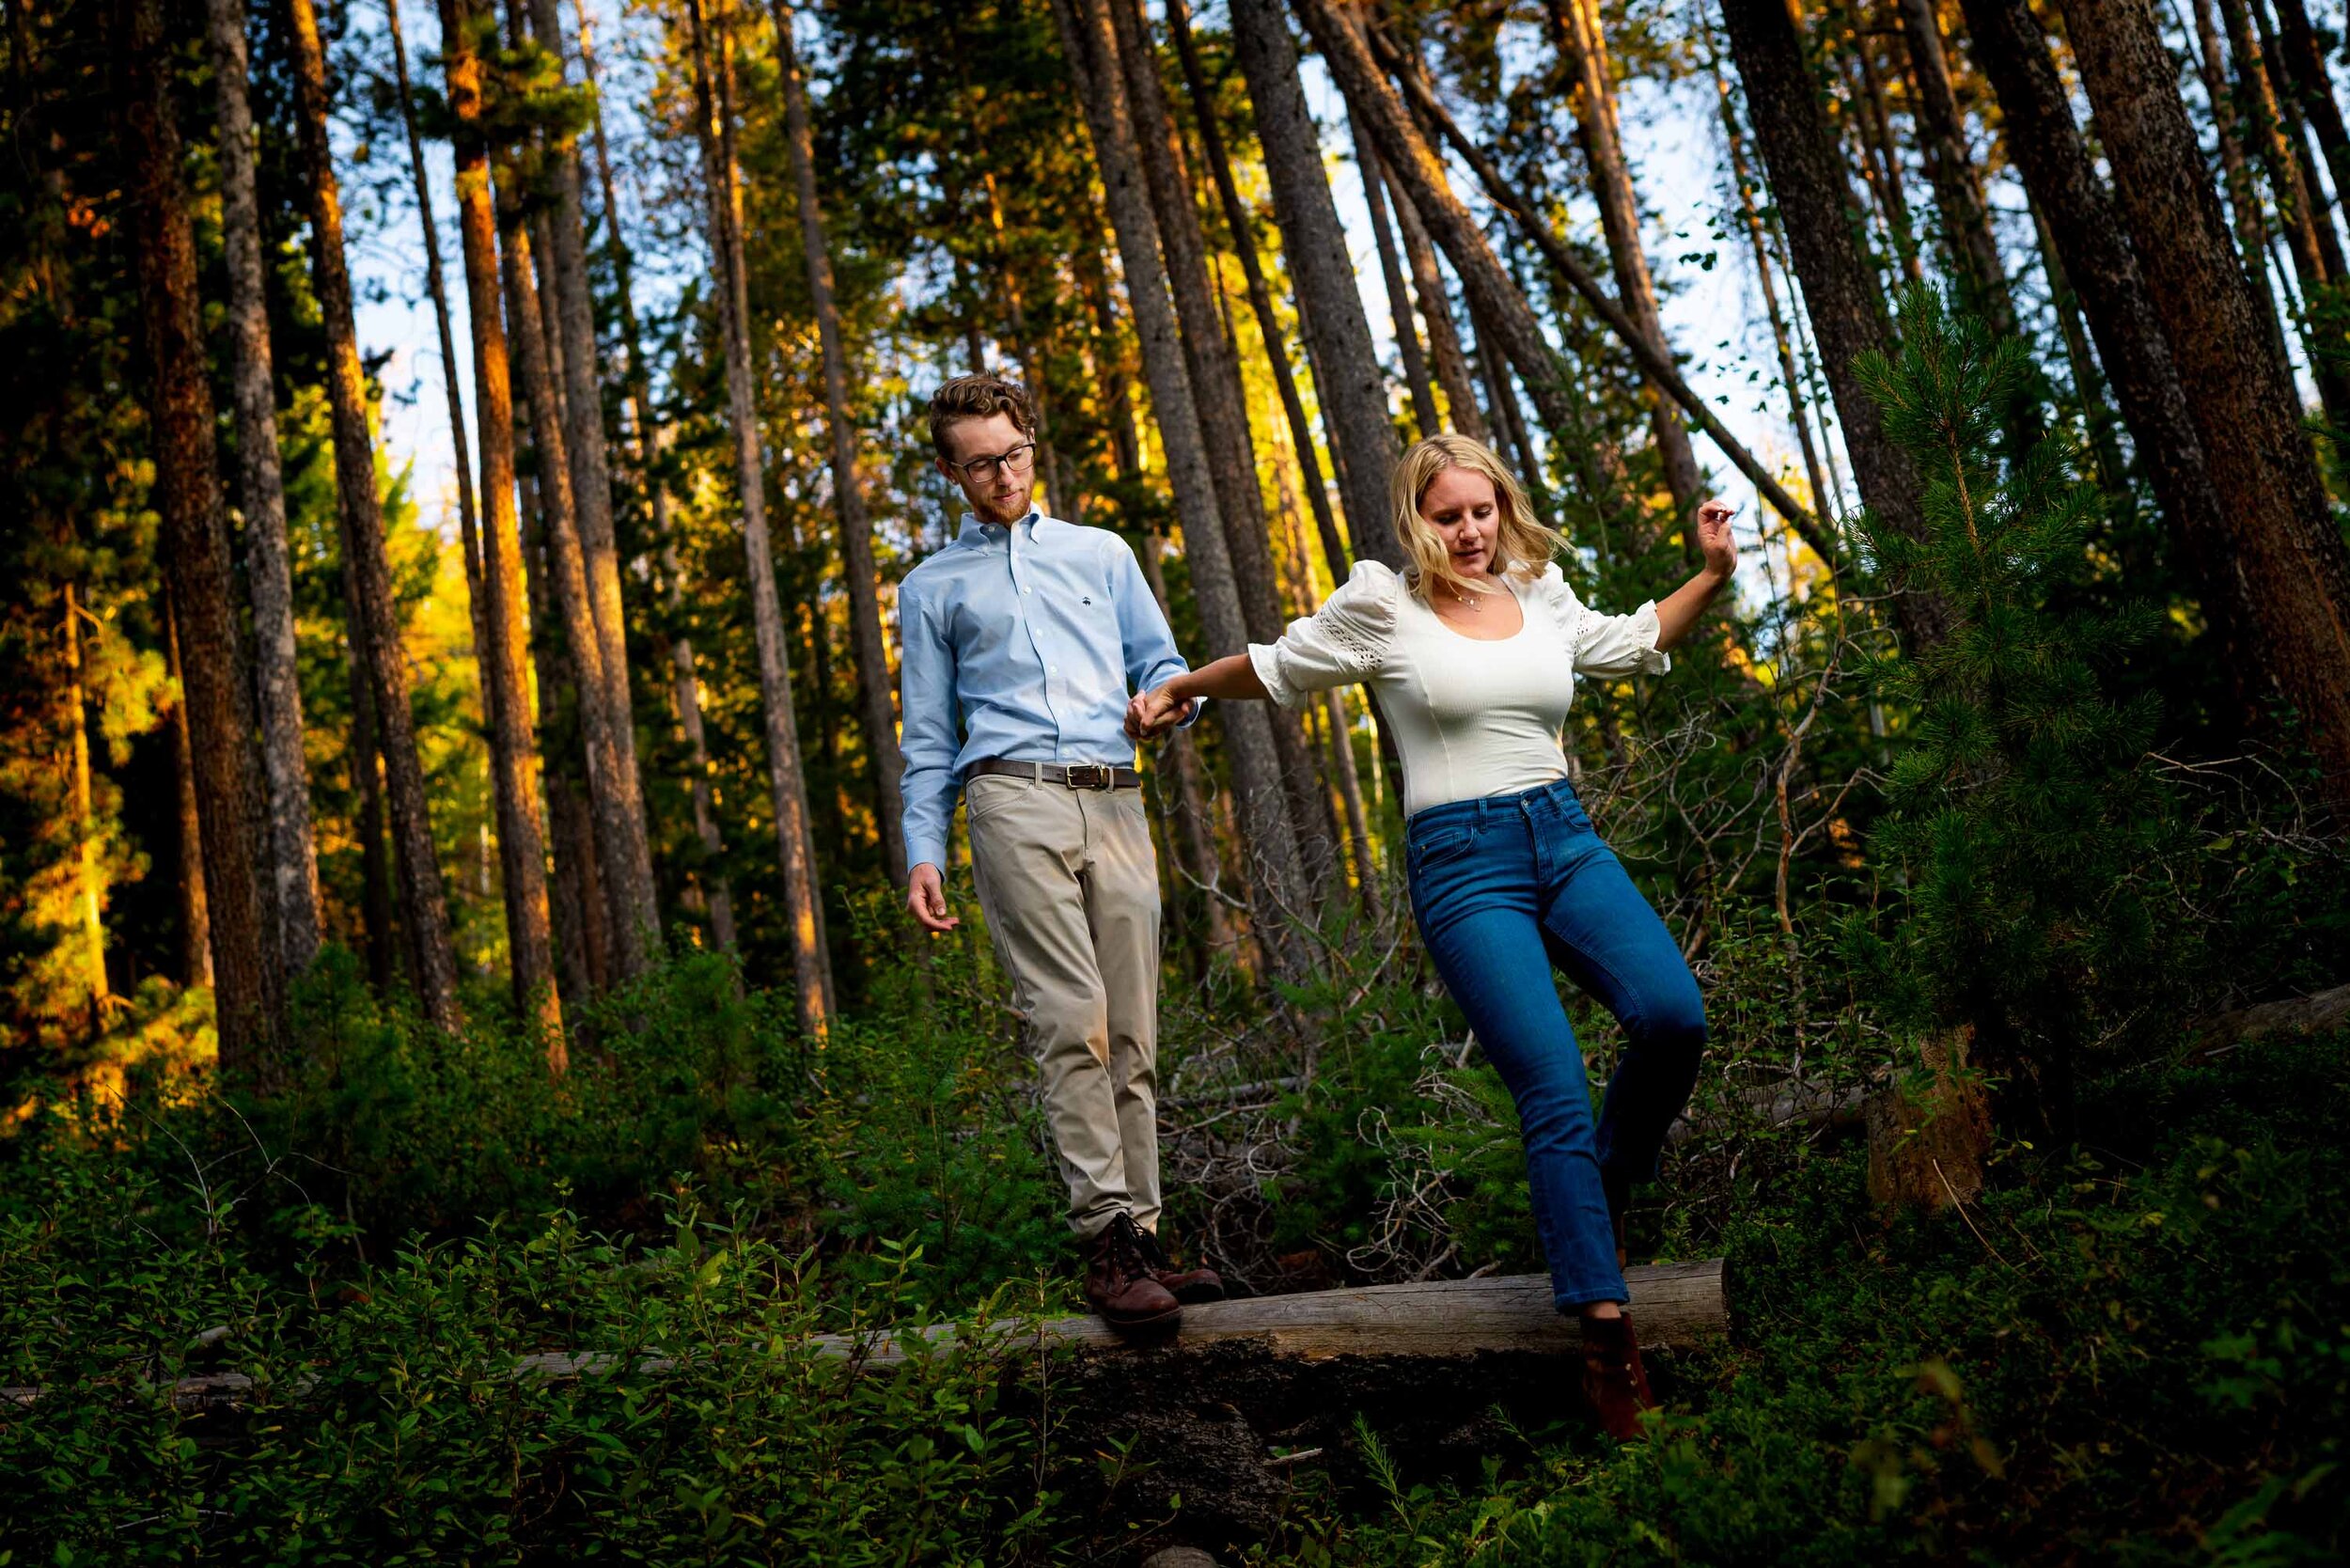 Engaged couple takes engagement photos during golden hour in the fall at Meyer Ranch Park, Colorado, Engagement Session, Engagement Photos, Engagement Photos Inspiration, Engagement Photography, Engagement Photographer, Meyer Ranch Park, Morrison Engagement Photos, Morrison engagement photos, Morrison engagement photographer, Colorado engagement photos, Colorado engagement photography, Colorado engagement photographer, Colorado engagement inspiration